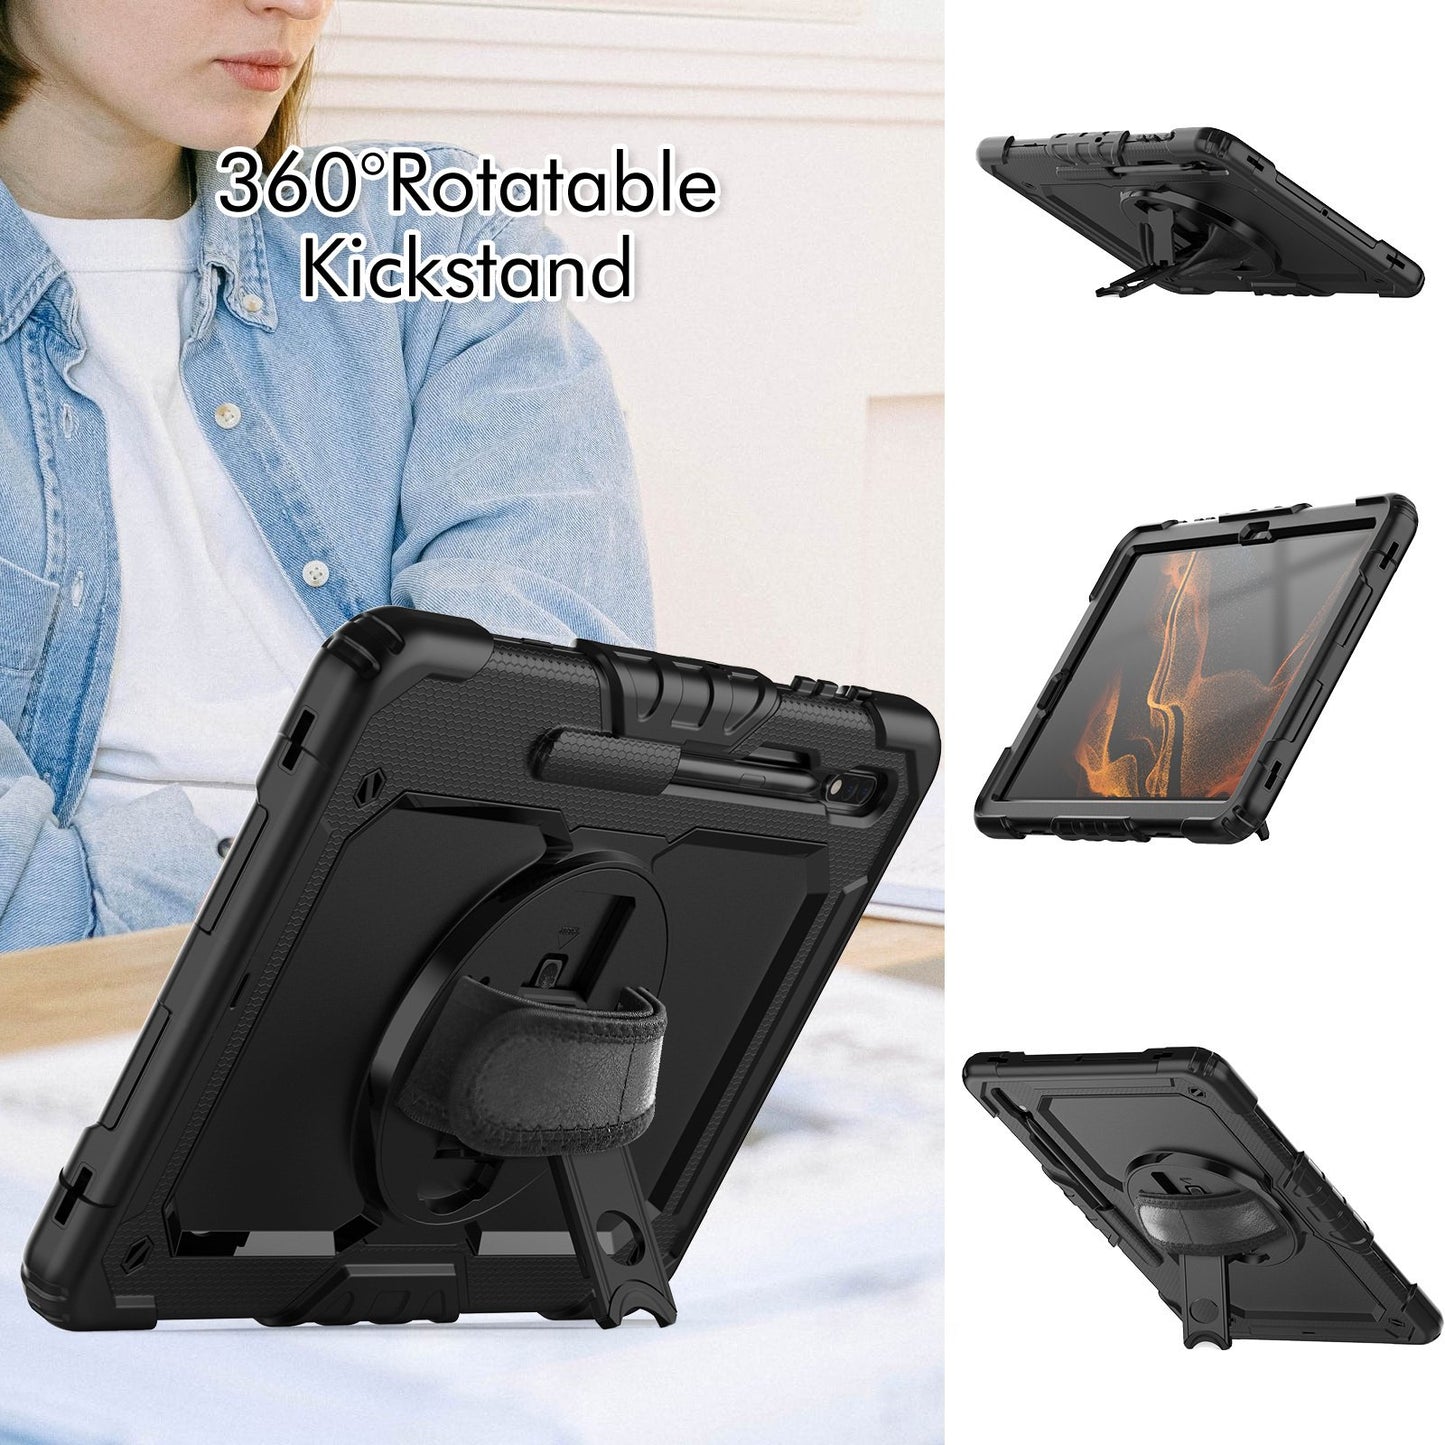 Shockproof Protector Silicone Cover Case + Pencil Holder + Handle Shoulder Strap For Samsung Galaxy TAB S7/S8/S8 Plus/S8 Ultra/S7 Plus/S7 FE/S6 Lite 10.4